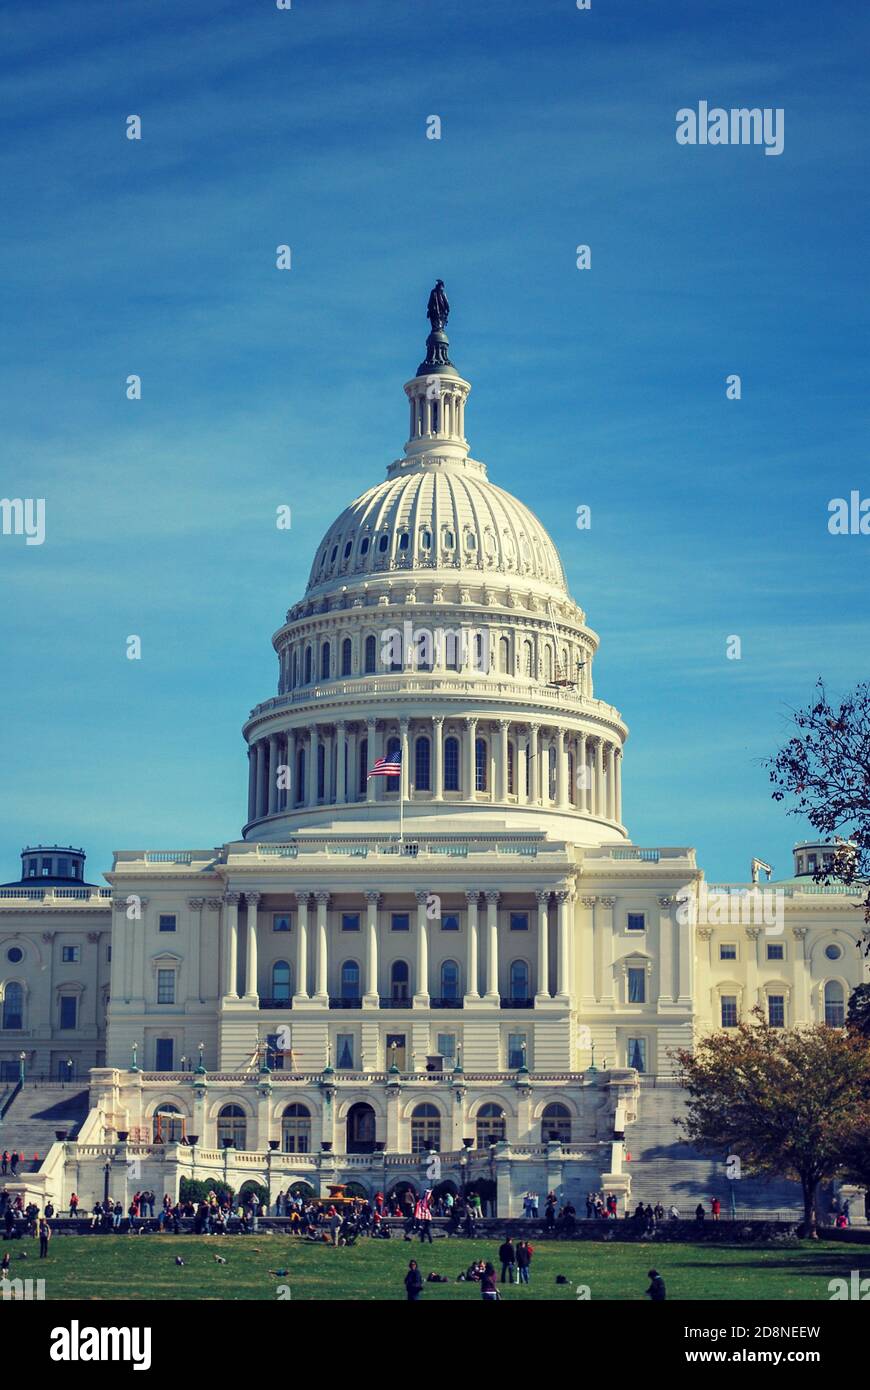 View of the US Capital Building in Washington D.C. USA Stock Photo